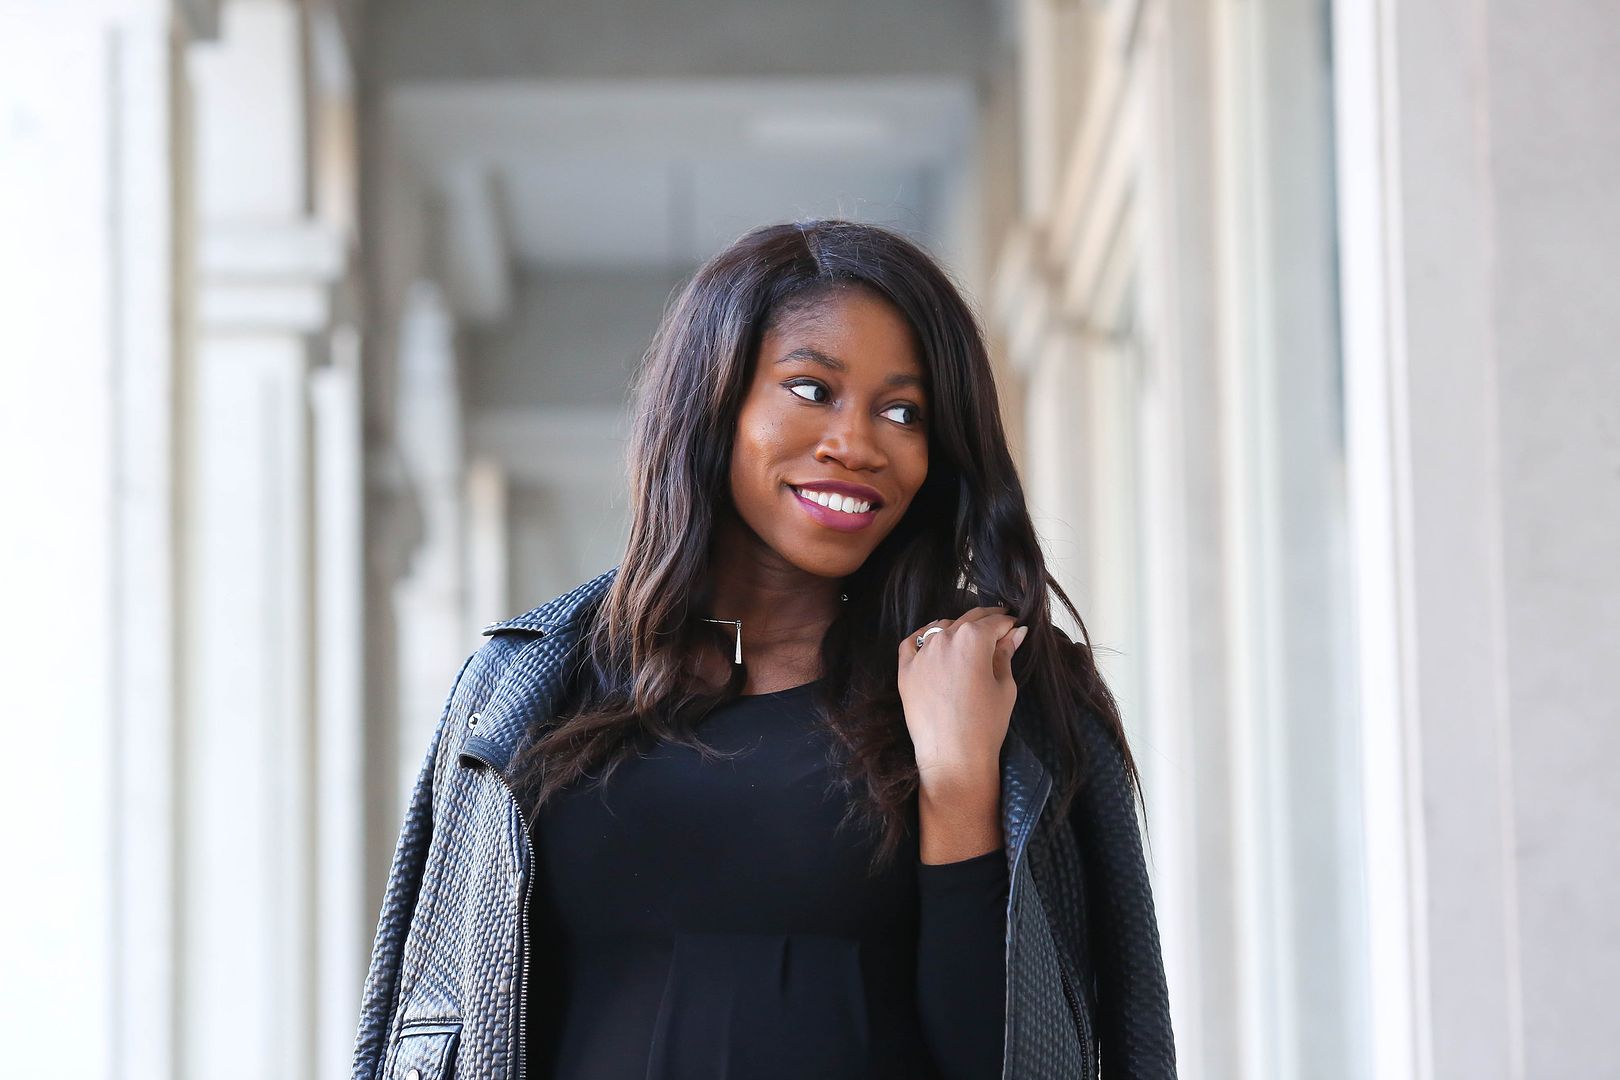 Holiday Party Style Guide, the black dress, Fashion blogger, Toronto fashion 